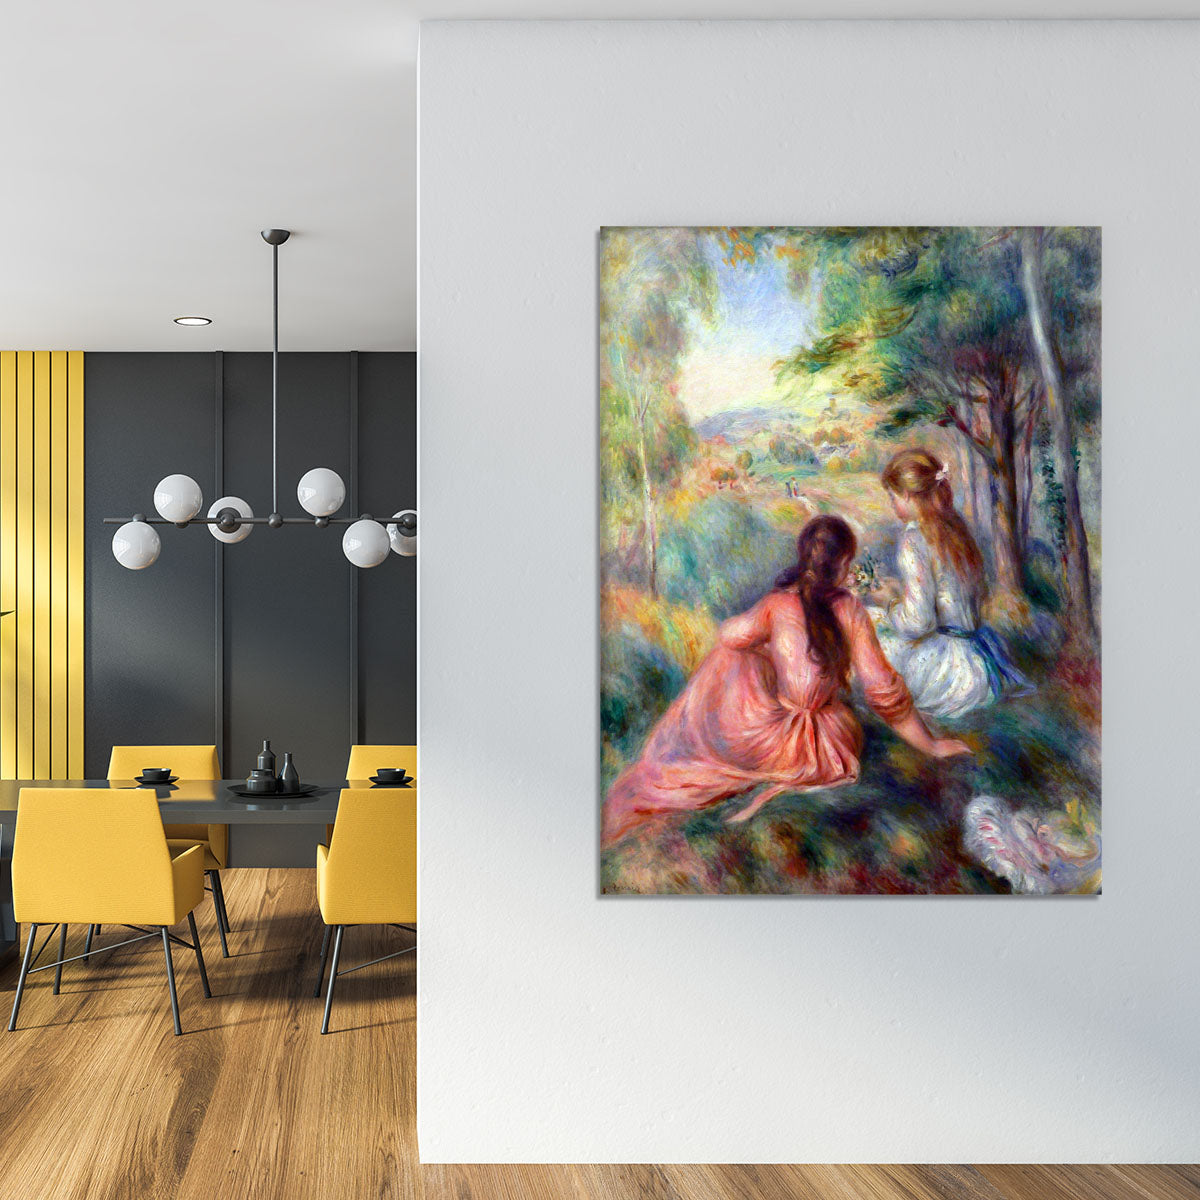 In the meadow by Renoir Canvas Print or Poster - Canvas Art Rocks - 4